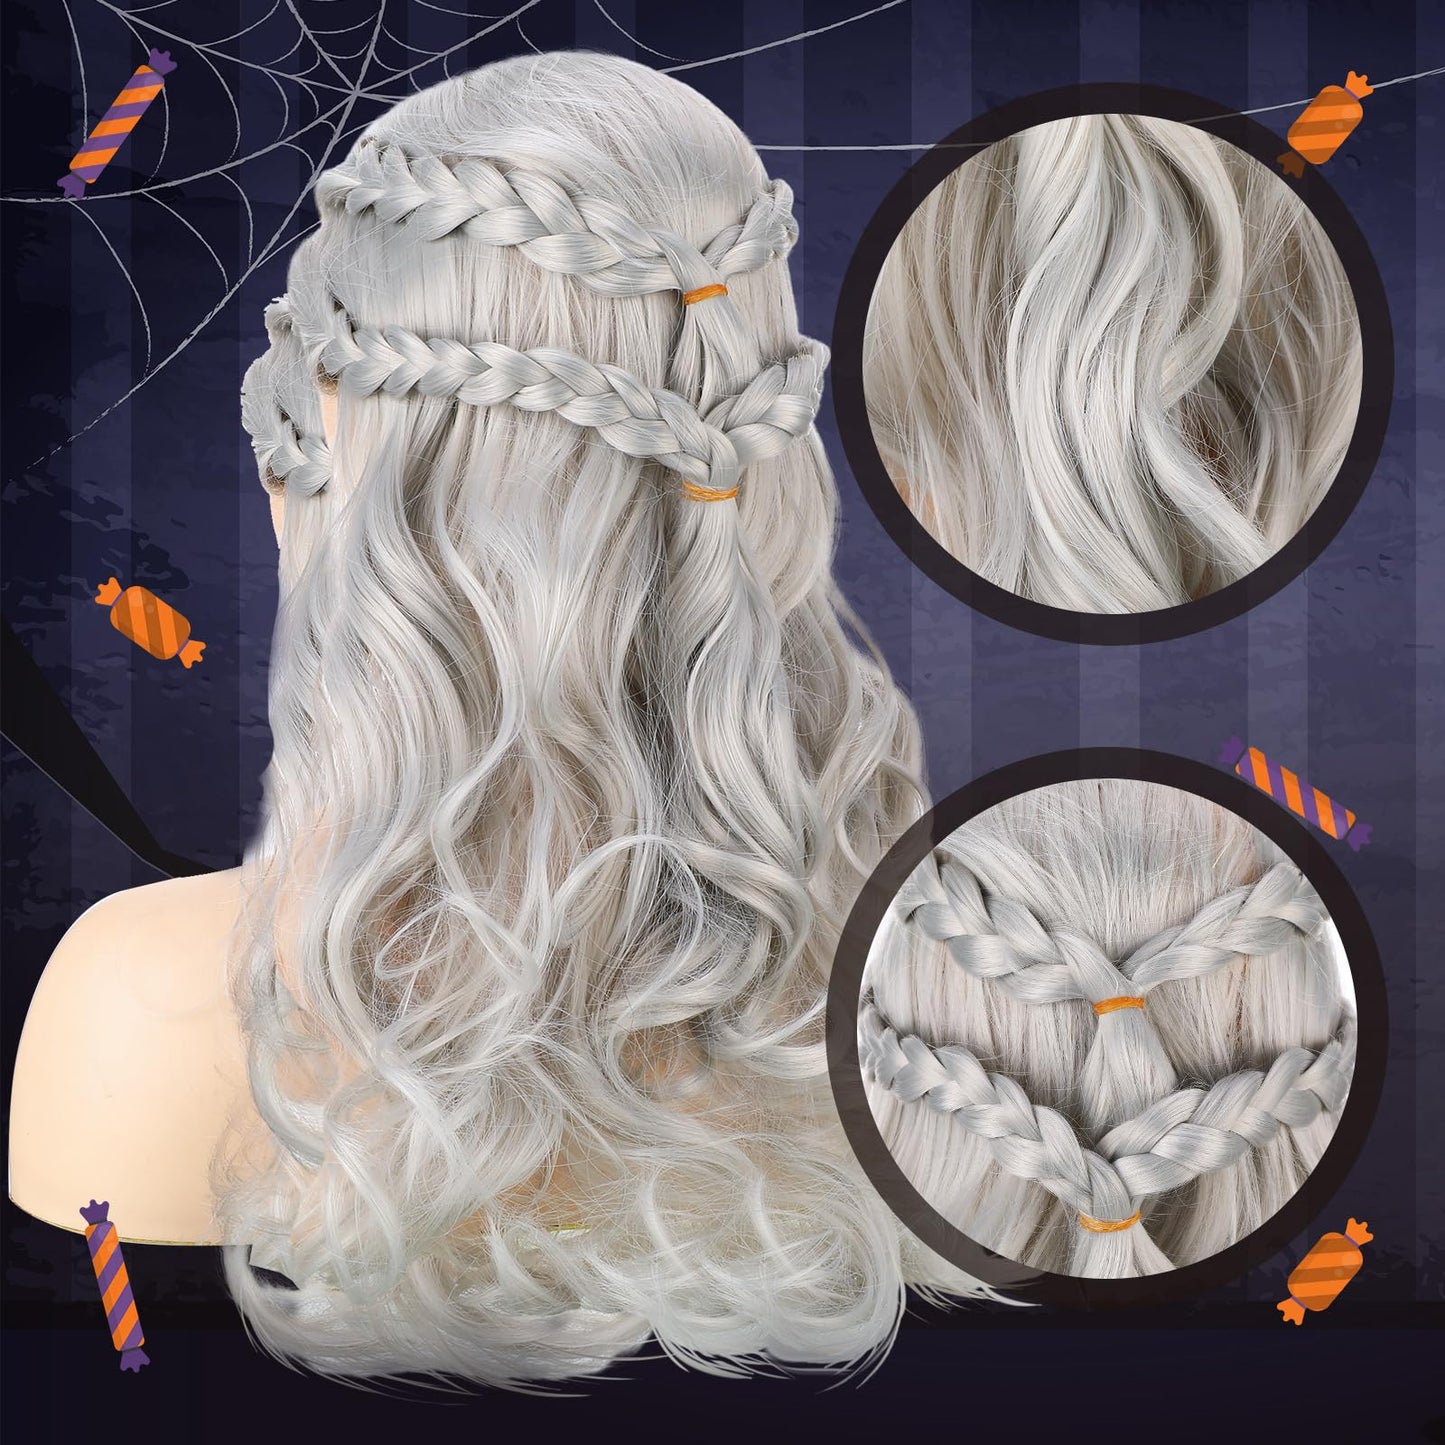 Tigeen 3 Pcs Halloween Silver Viking Wig Costume Sets for Women Includes Braided Silver Wigs Music Note Pendant Dragon Necklace Dragon Keel Chain Link Bracelet Dragon Jewelry Vintage Gift for Party